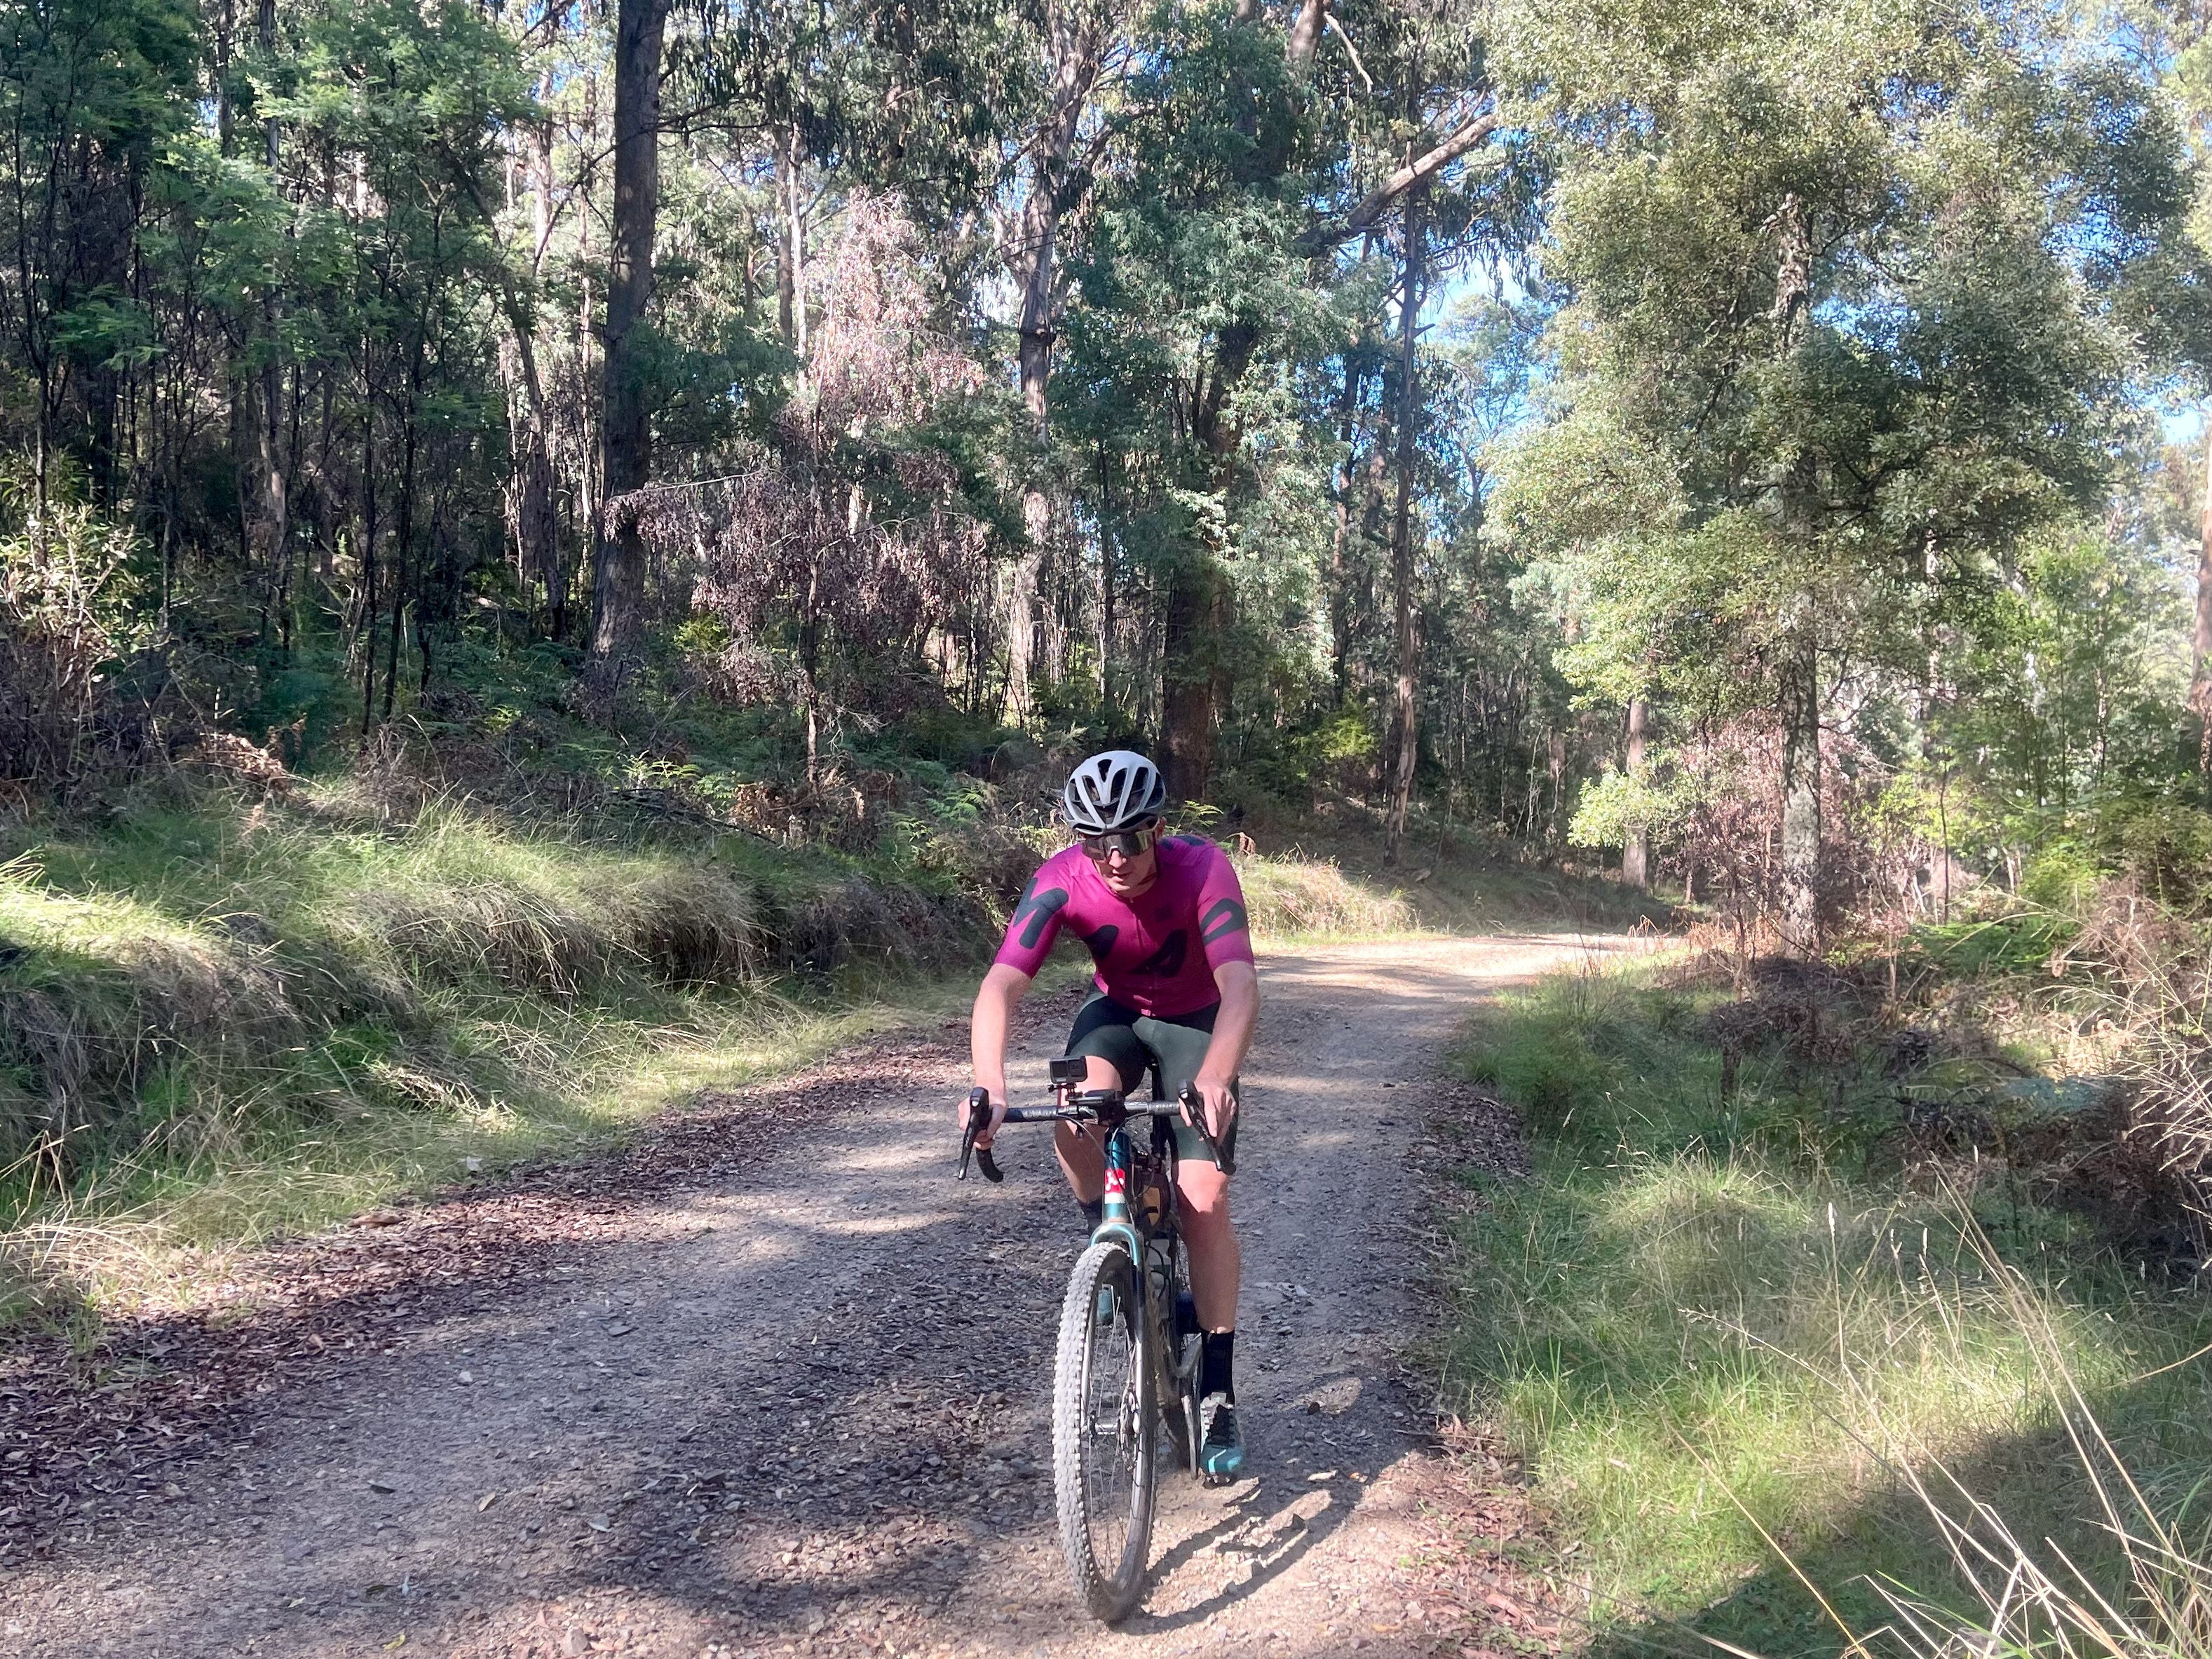 Cyclist riding on gravel roads through the forest on a sunny day